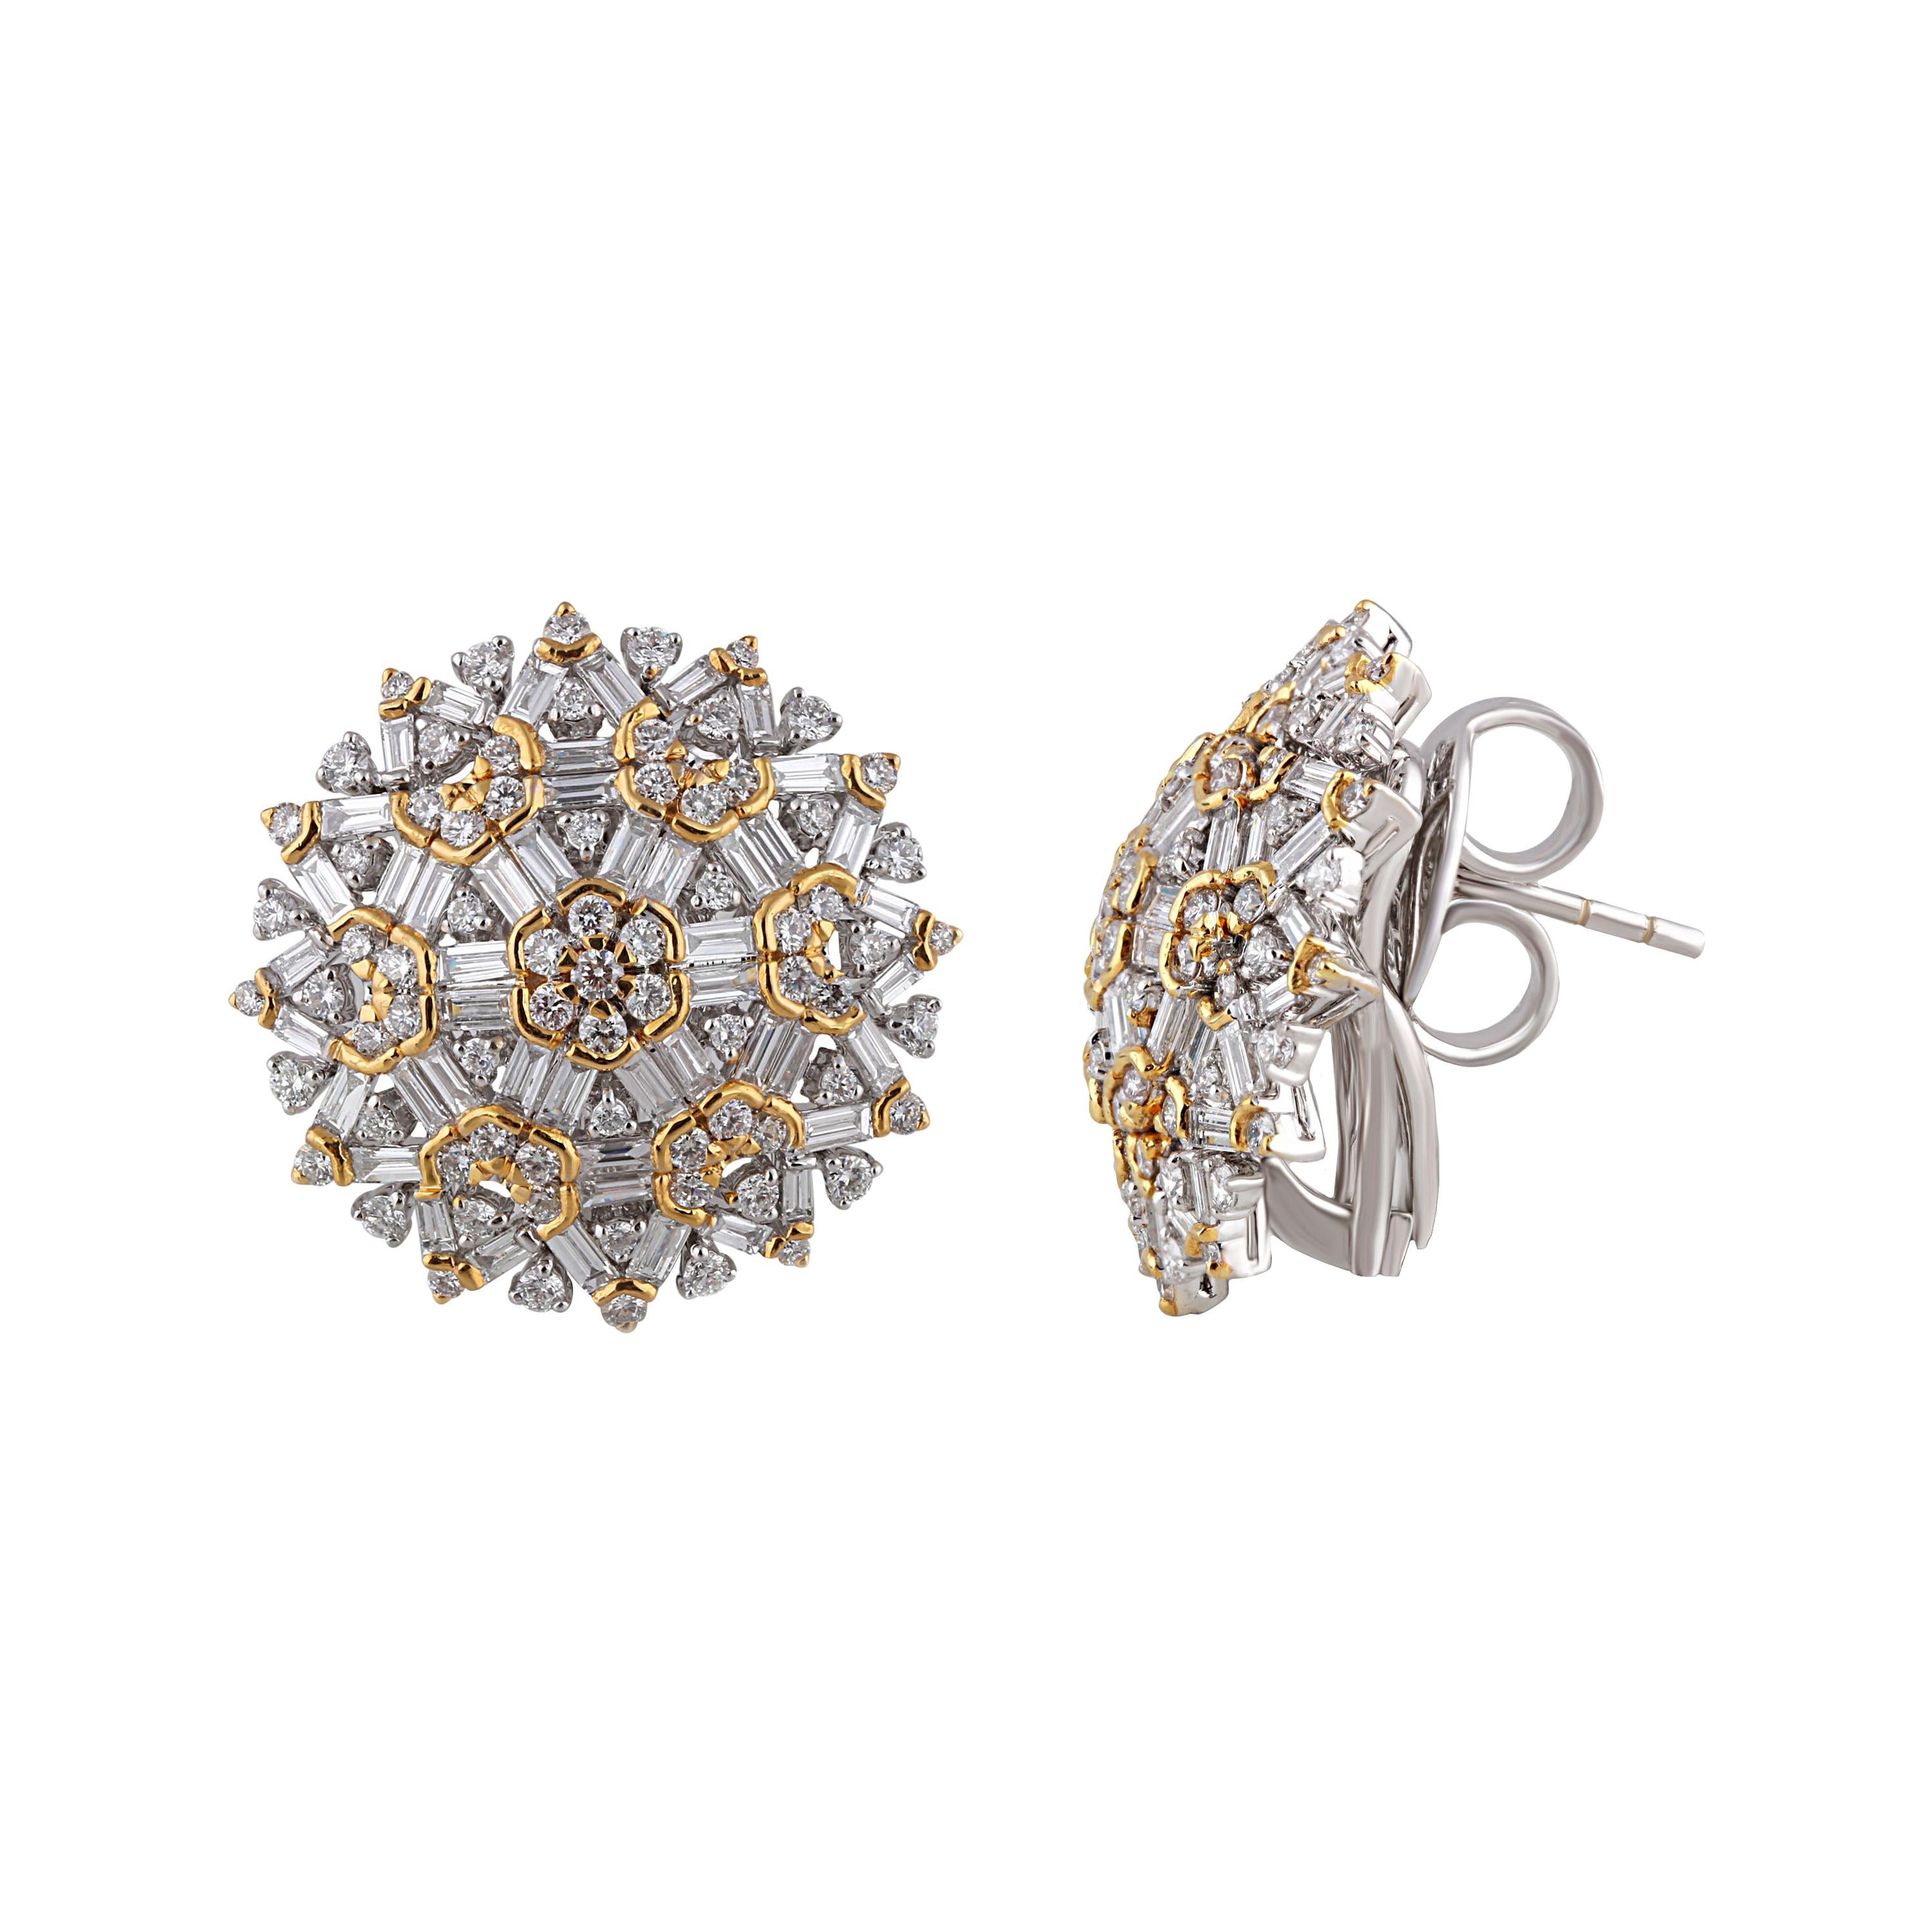 Floral Stud Earrings in Diamonds and 18 Karat Gold